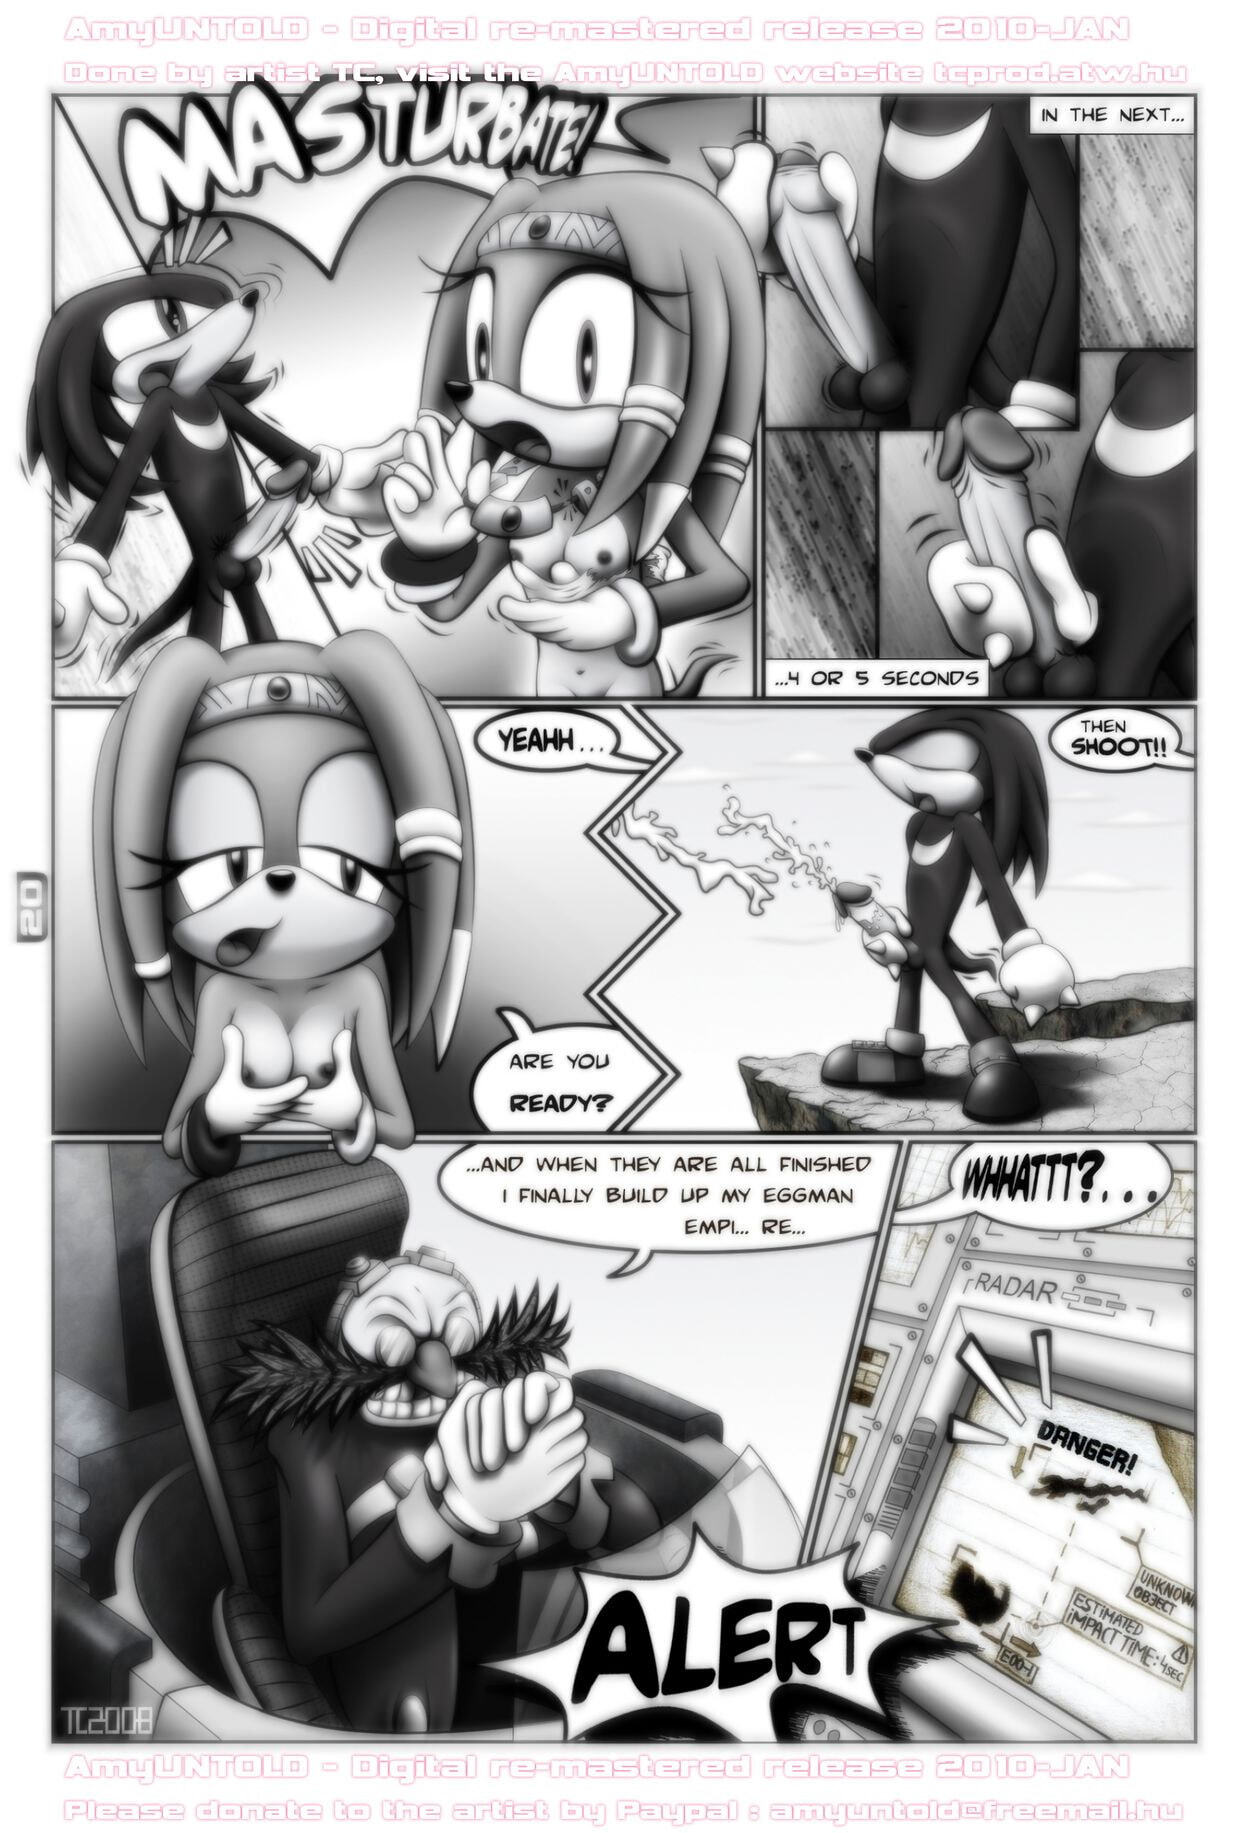 Amy Untold - Finally - Page 20